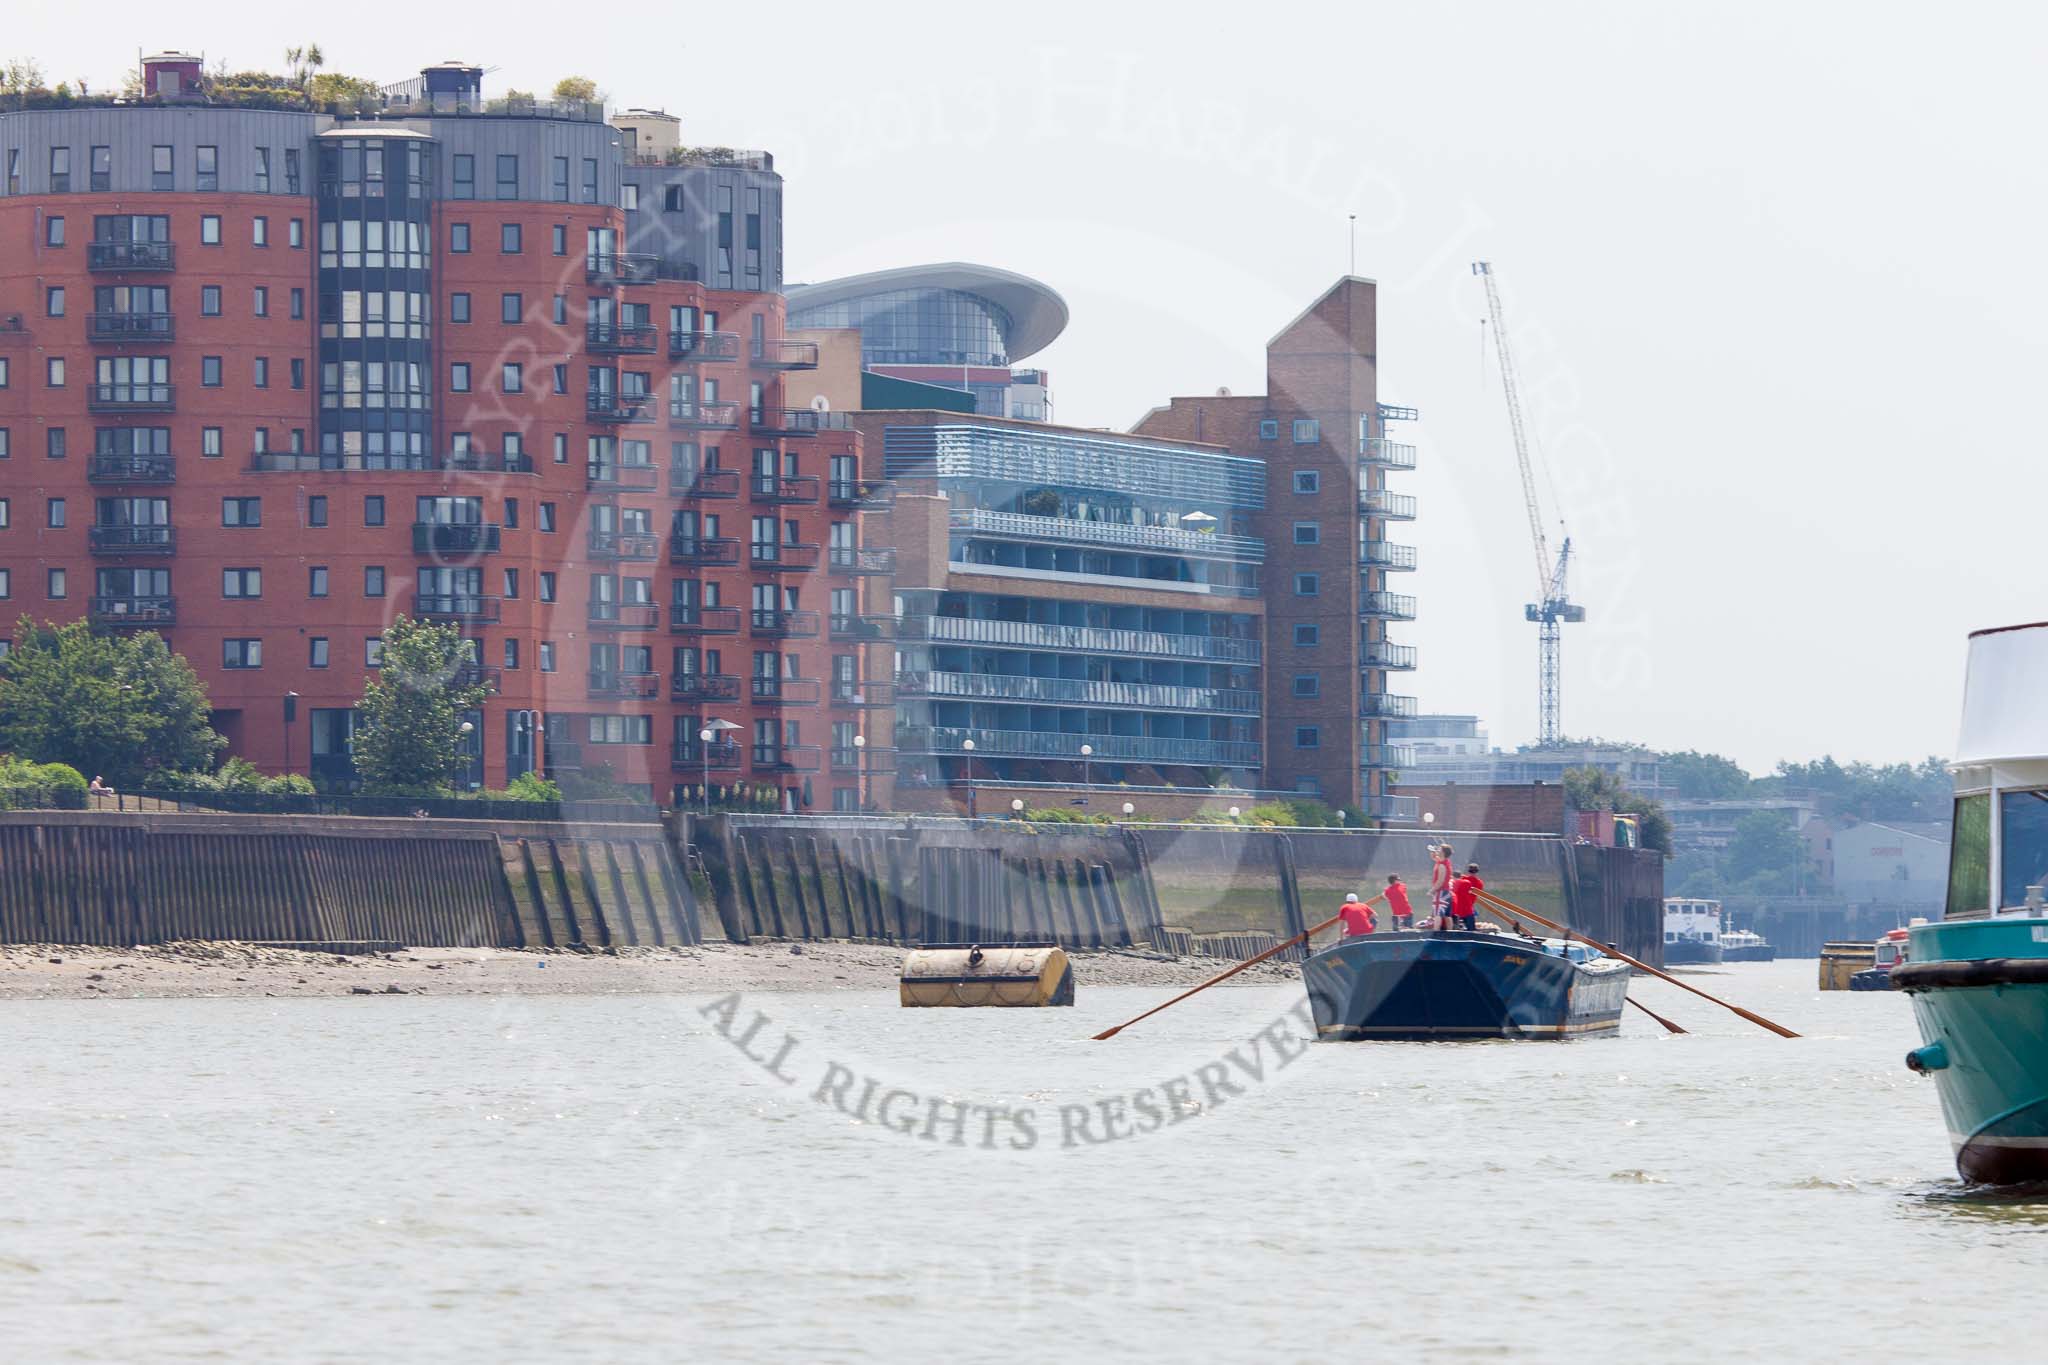 TOW River Thames Barge Driving Race 2013: Barge "Diana", by Trinity Buoy Wharf..
River Thames between Greenwich and Westminster,
London,

United Kingdom,
on 13 July 2013 at 12:58, image #251